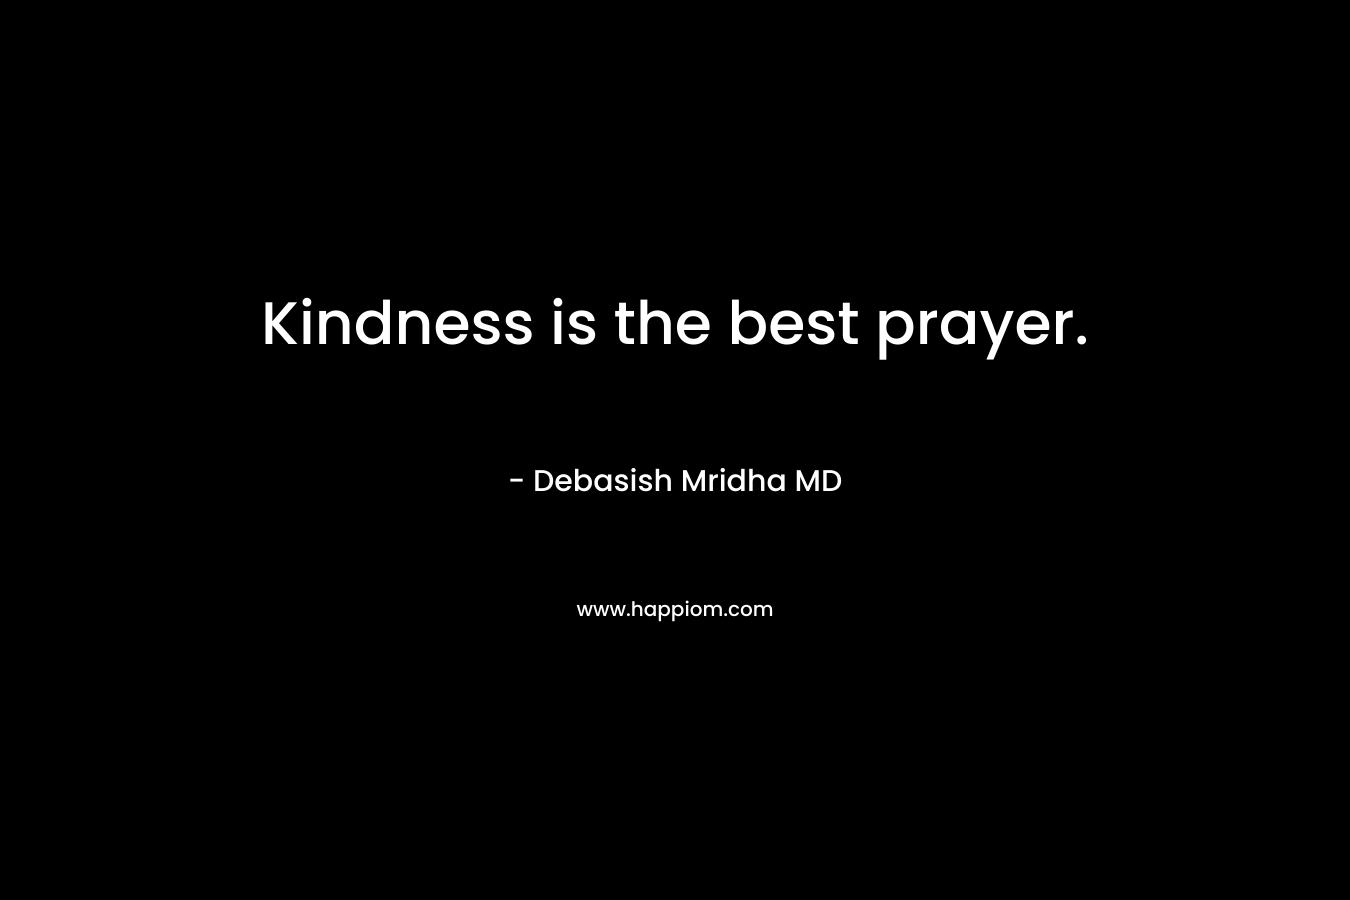 Kindness is the best prayer.